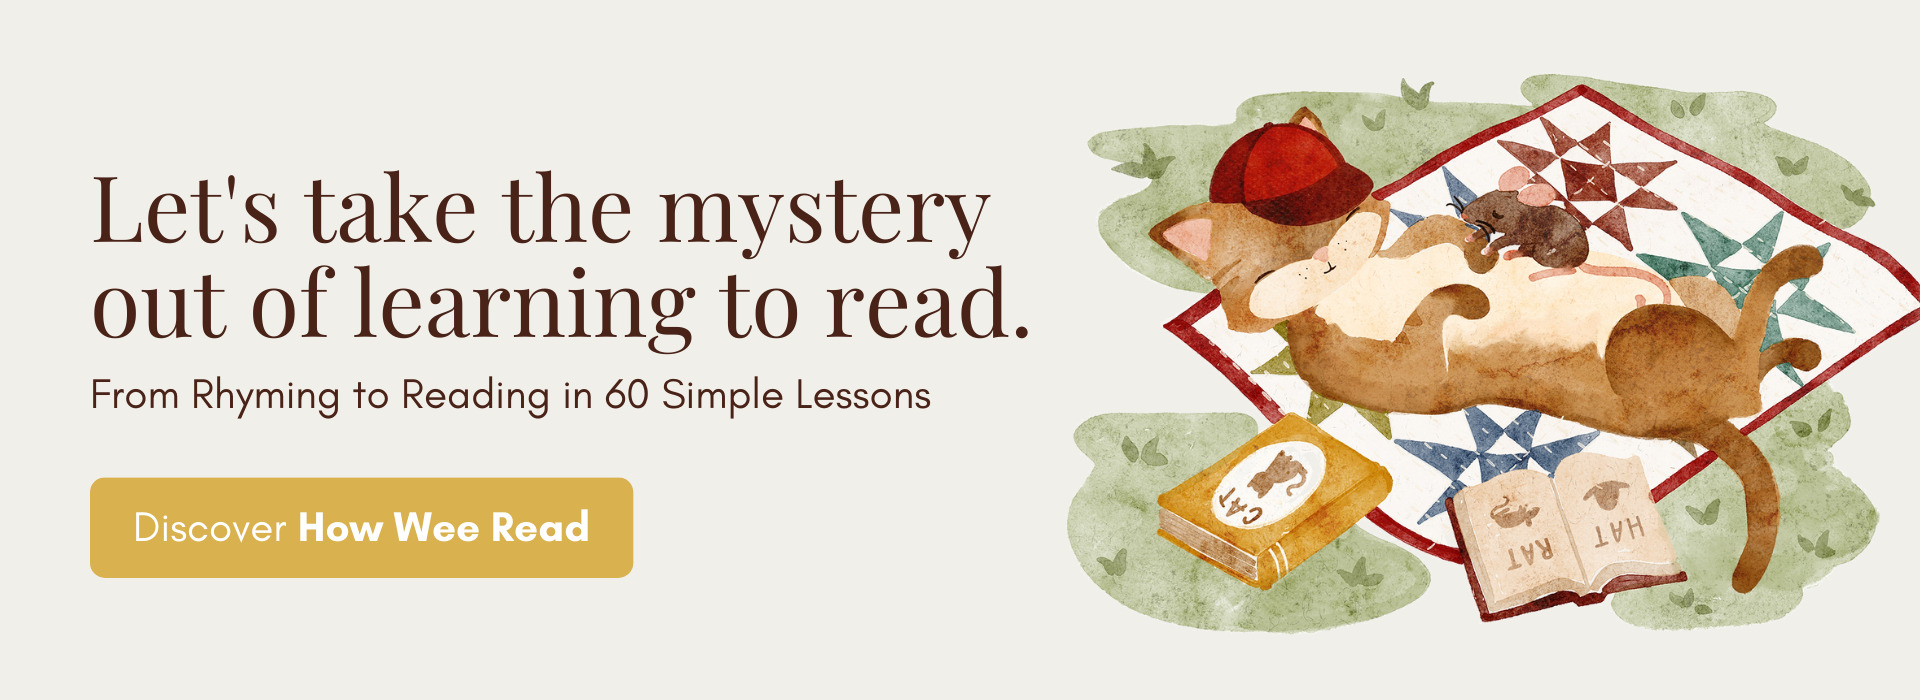 Let's take the mystery out of learning to read. From Rhyming to Reading in 60 Simple Lessons. Discover How Wee Learn.